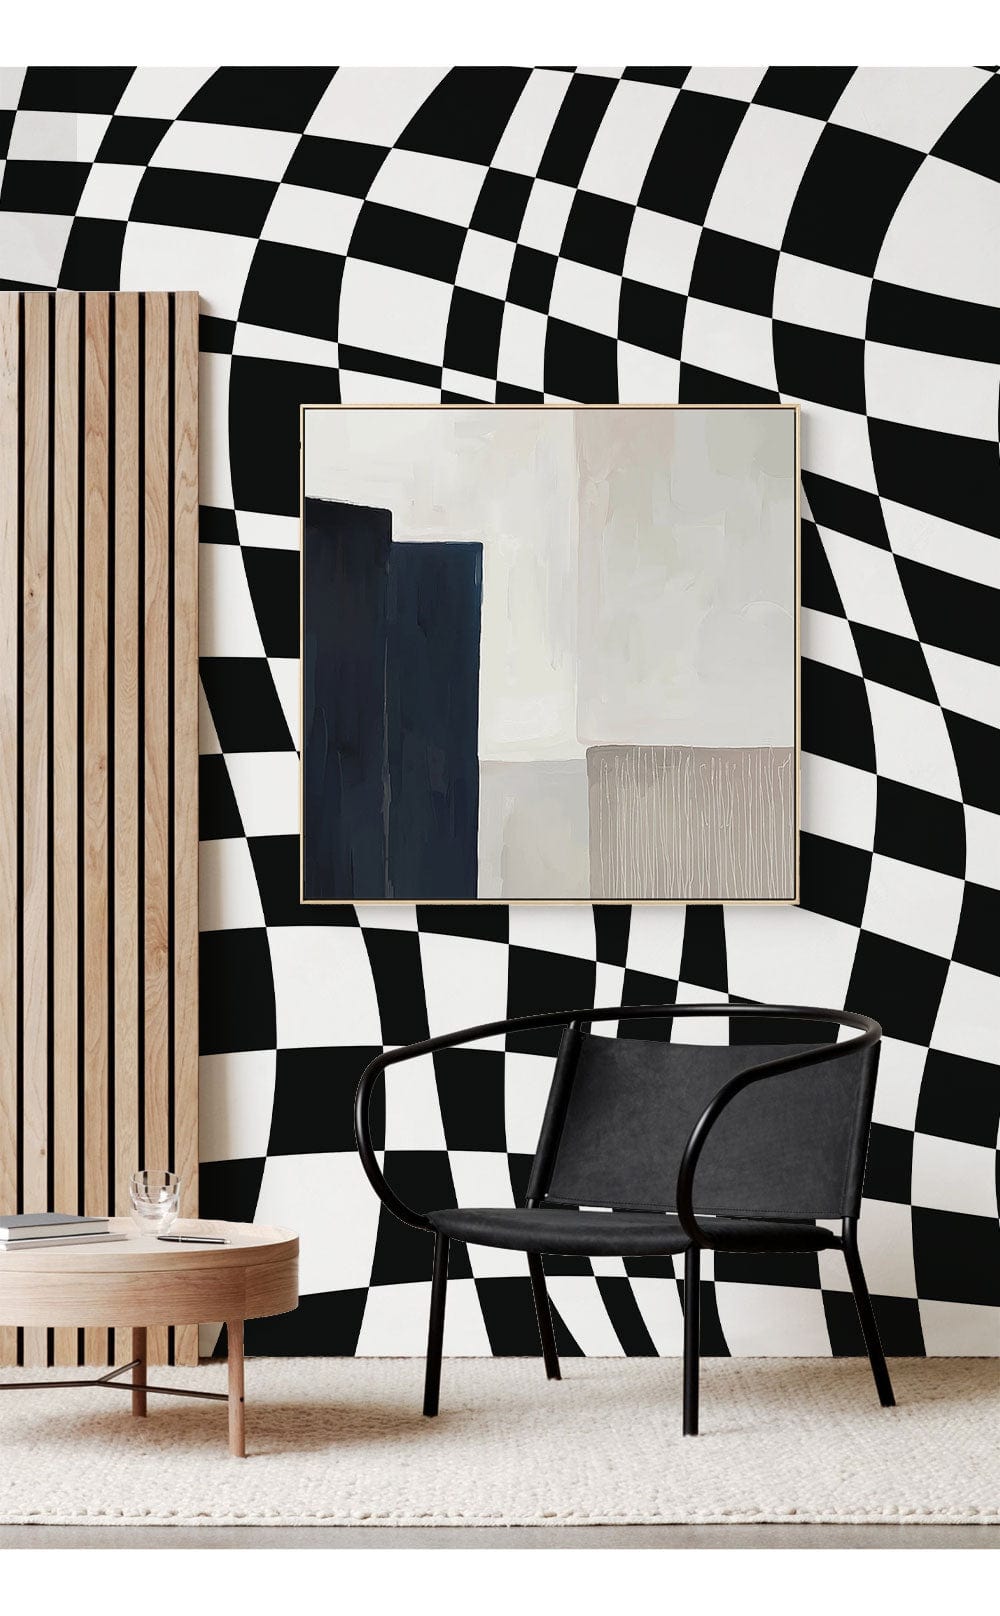 Wallcovering Mural with a Wavy Checkerboard Grid for Use in Decorating the Hallway